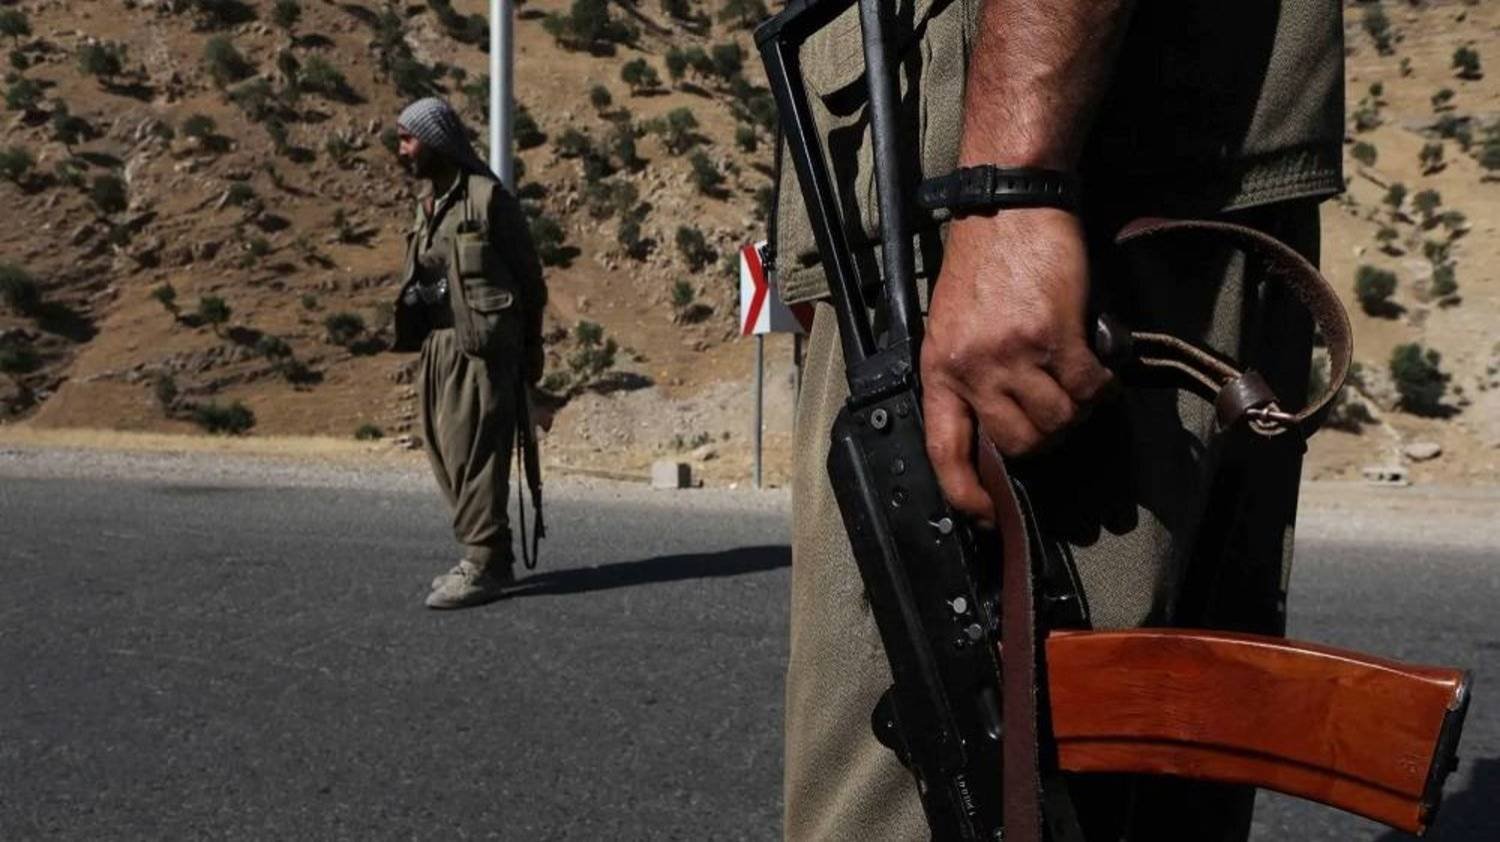 A member of the PKK carries an automatic rifle on a road in Iraq's Qandil Mountains in 2018. (AFP)
